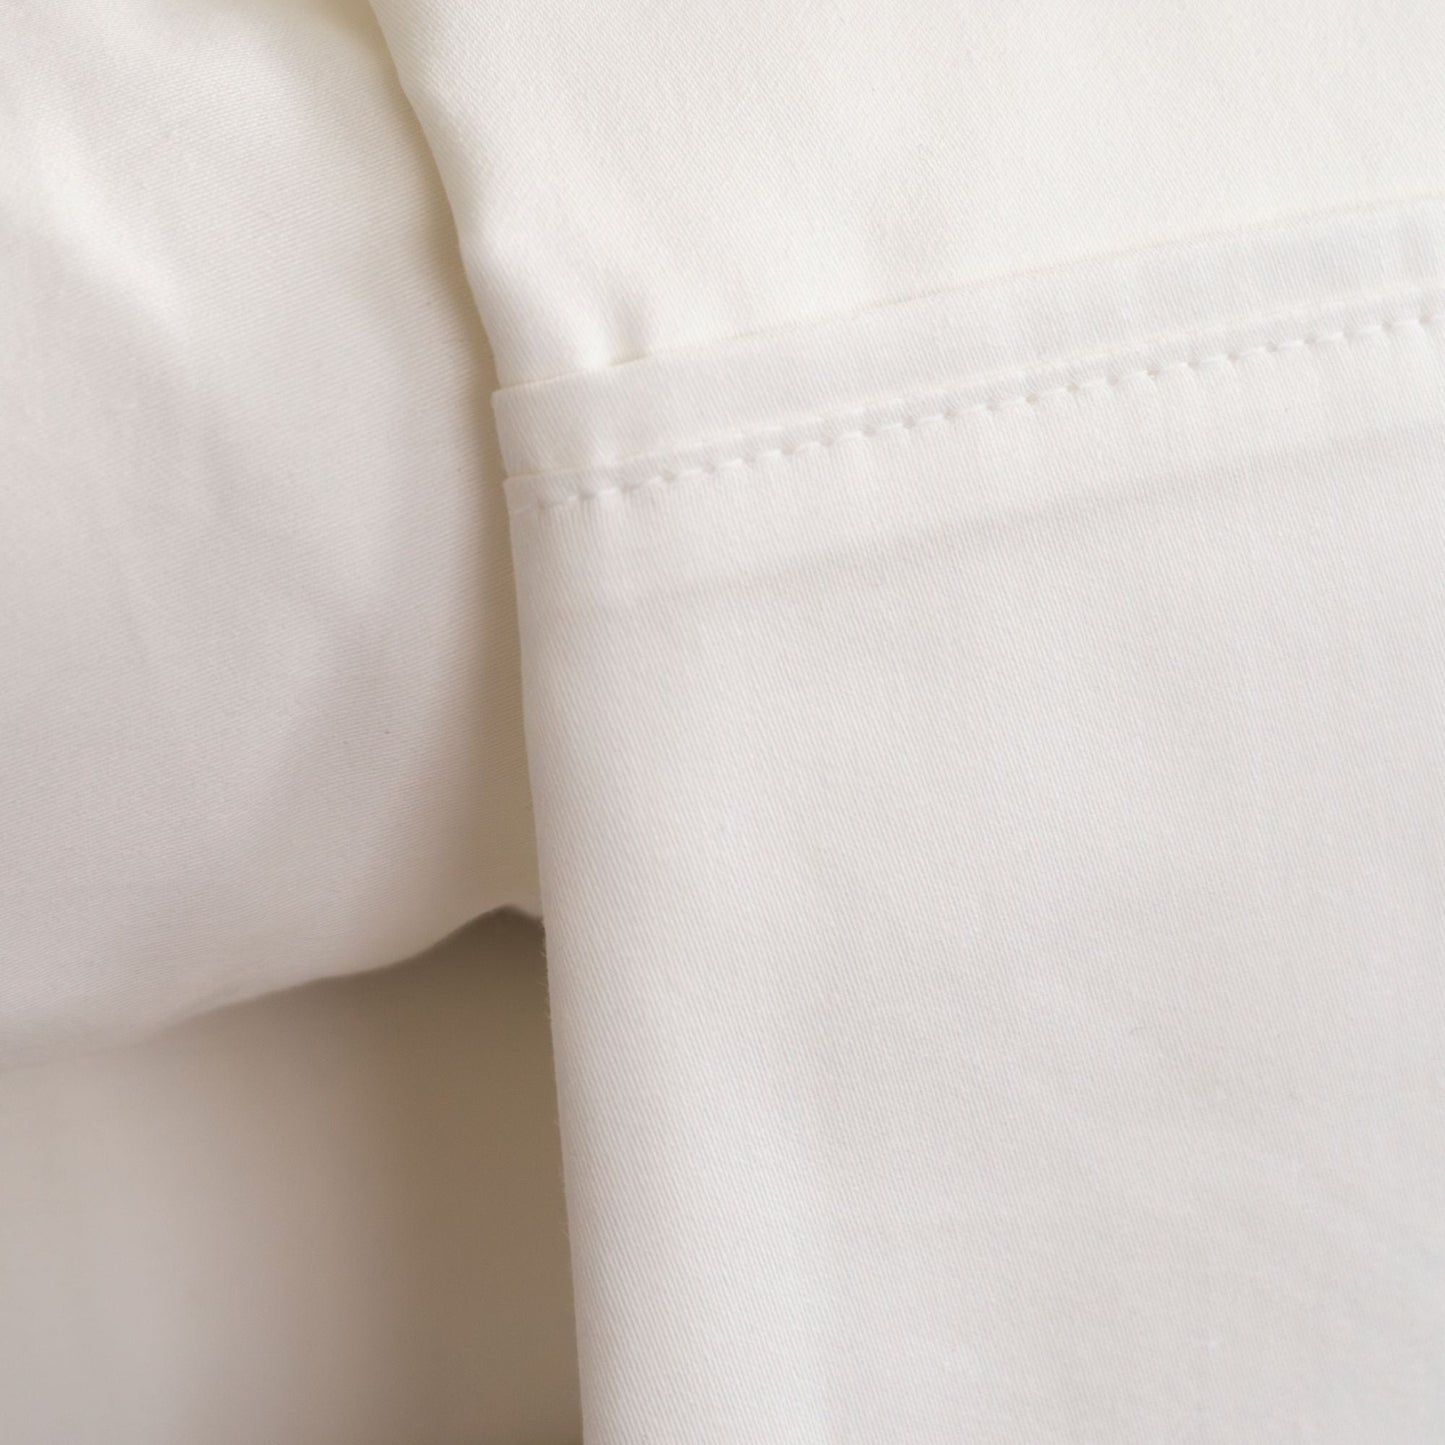 Protect-A-Bed Staynew® Cotton Sheet Set Queen